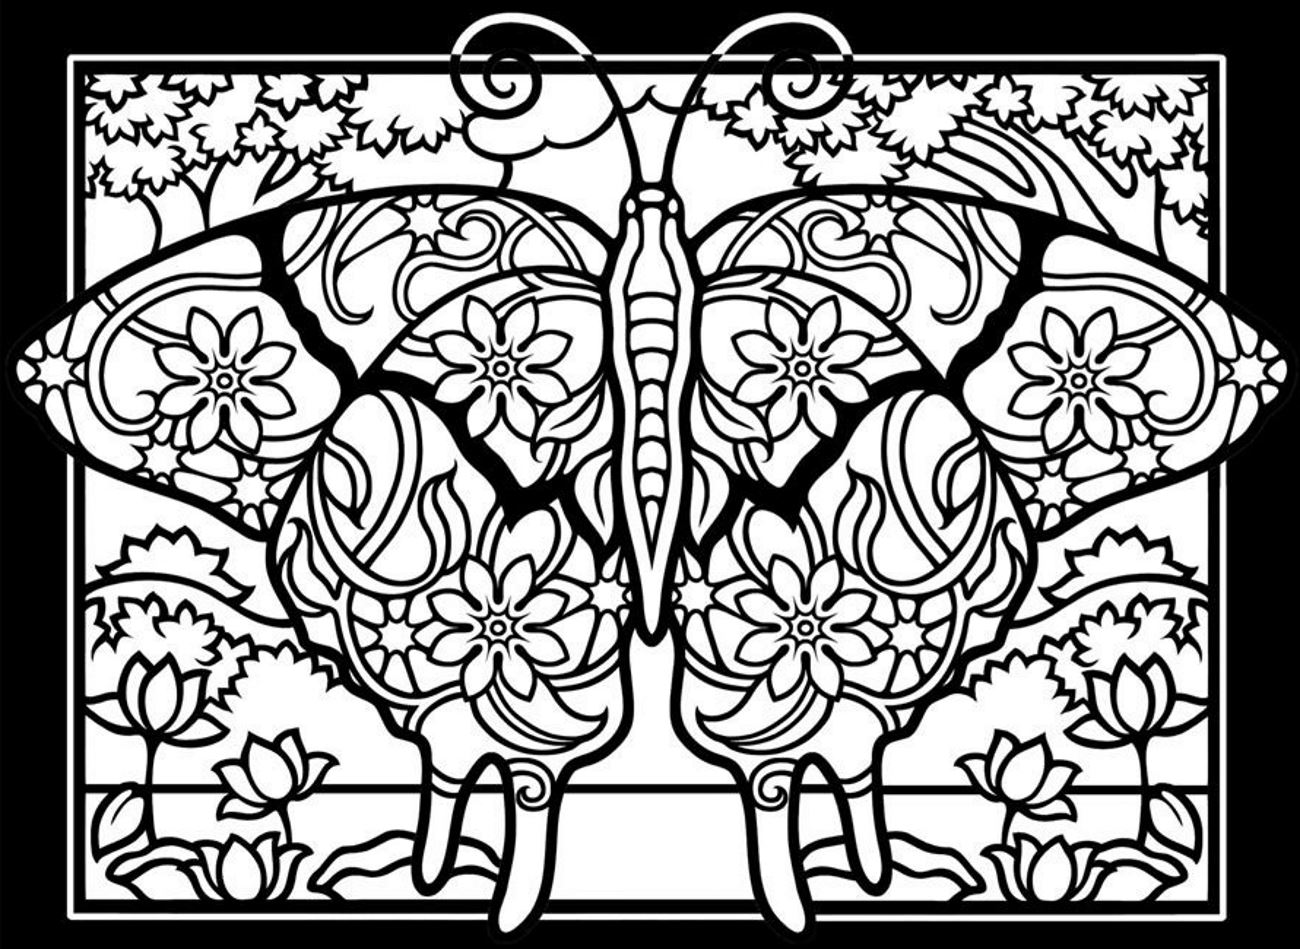 Butterfly Coloring Pages for Adults - Best Coloring Pages 